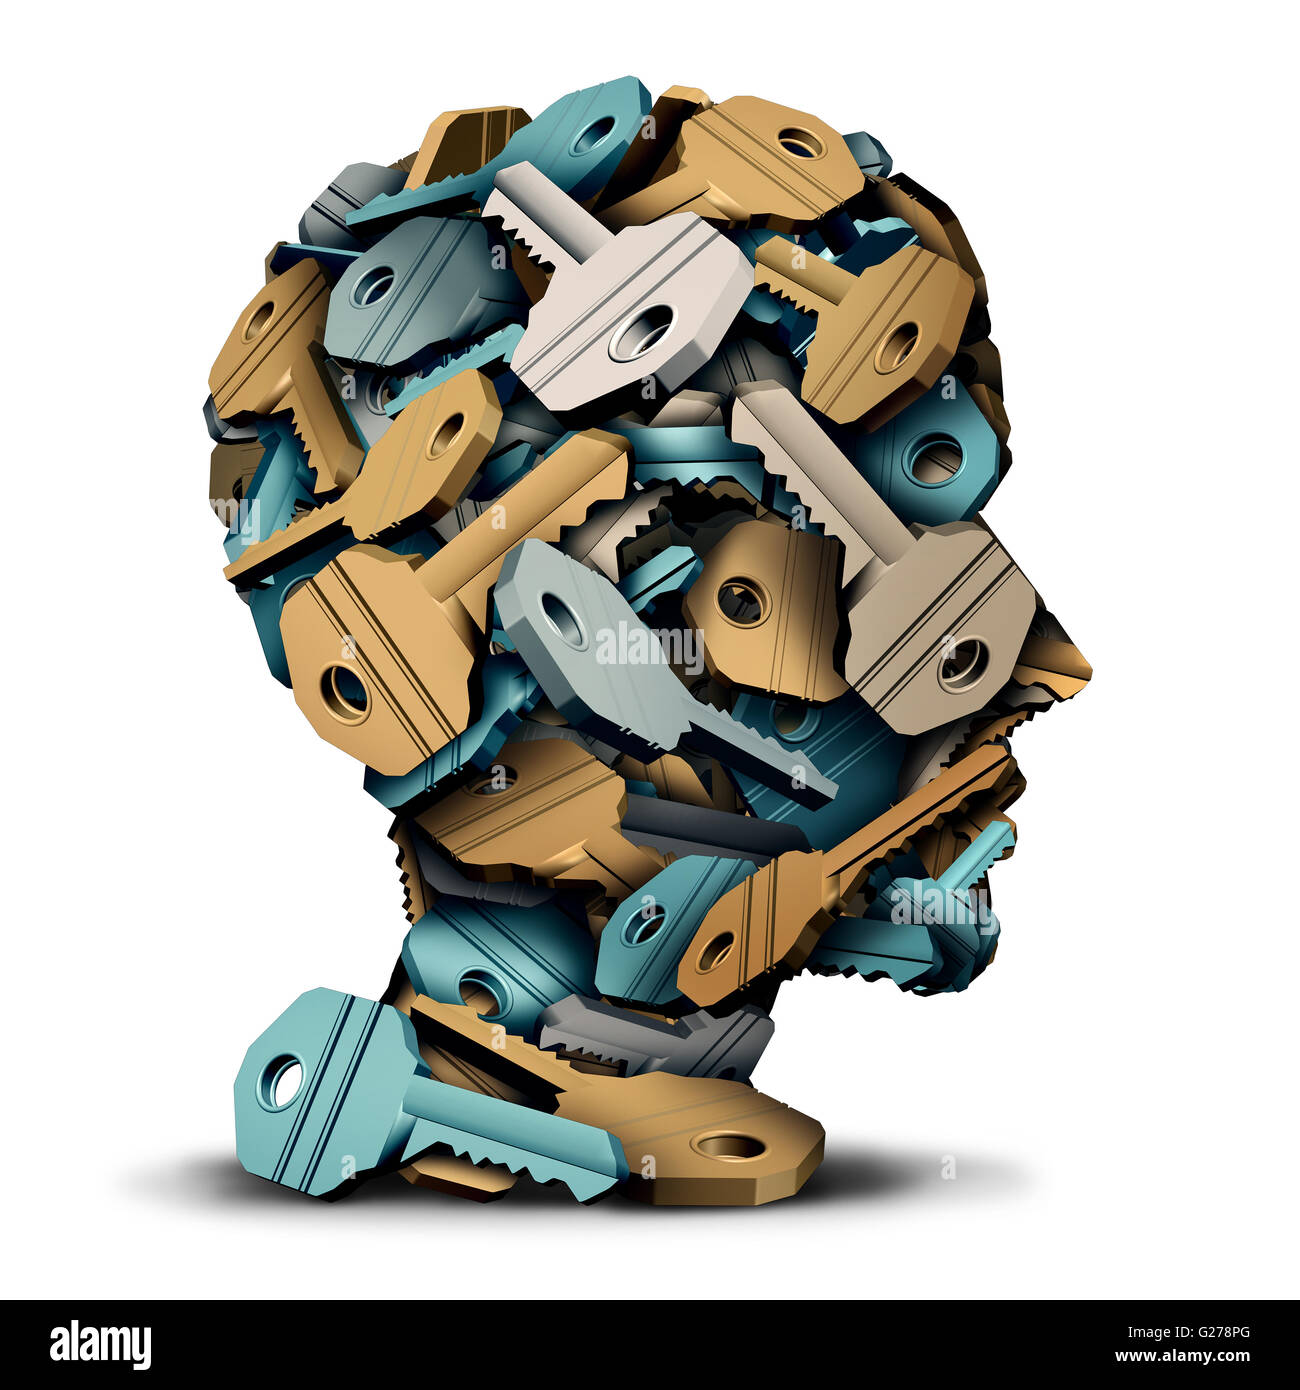 Key head concept as a group of 3D illustration keys grouped together in the shape of a human face as a security solution and intelligence metaphor. Stock Photo